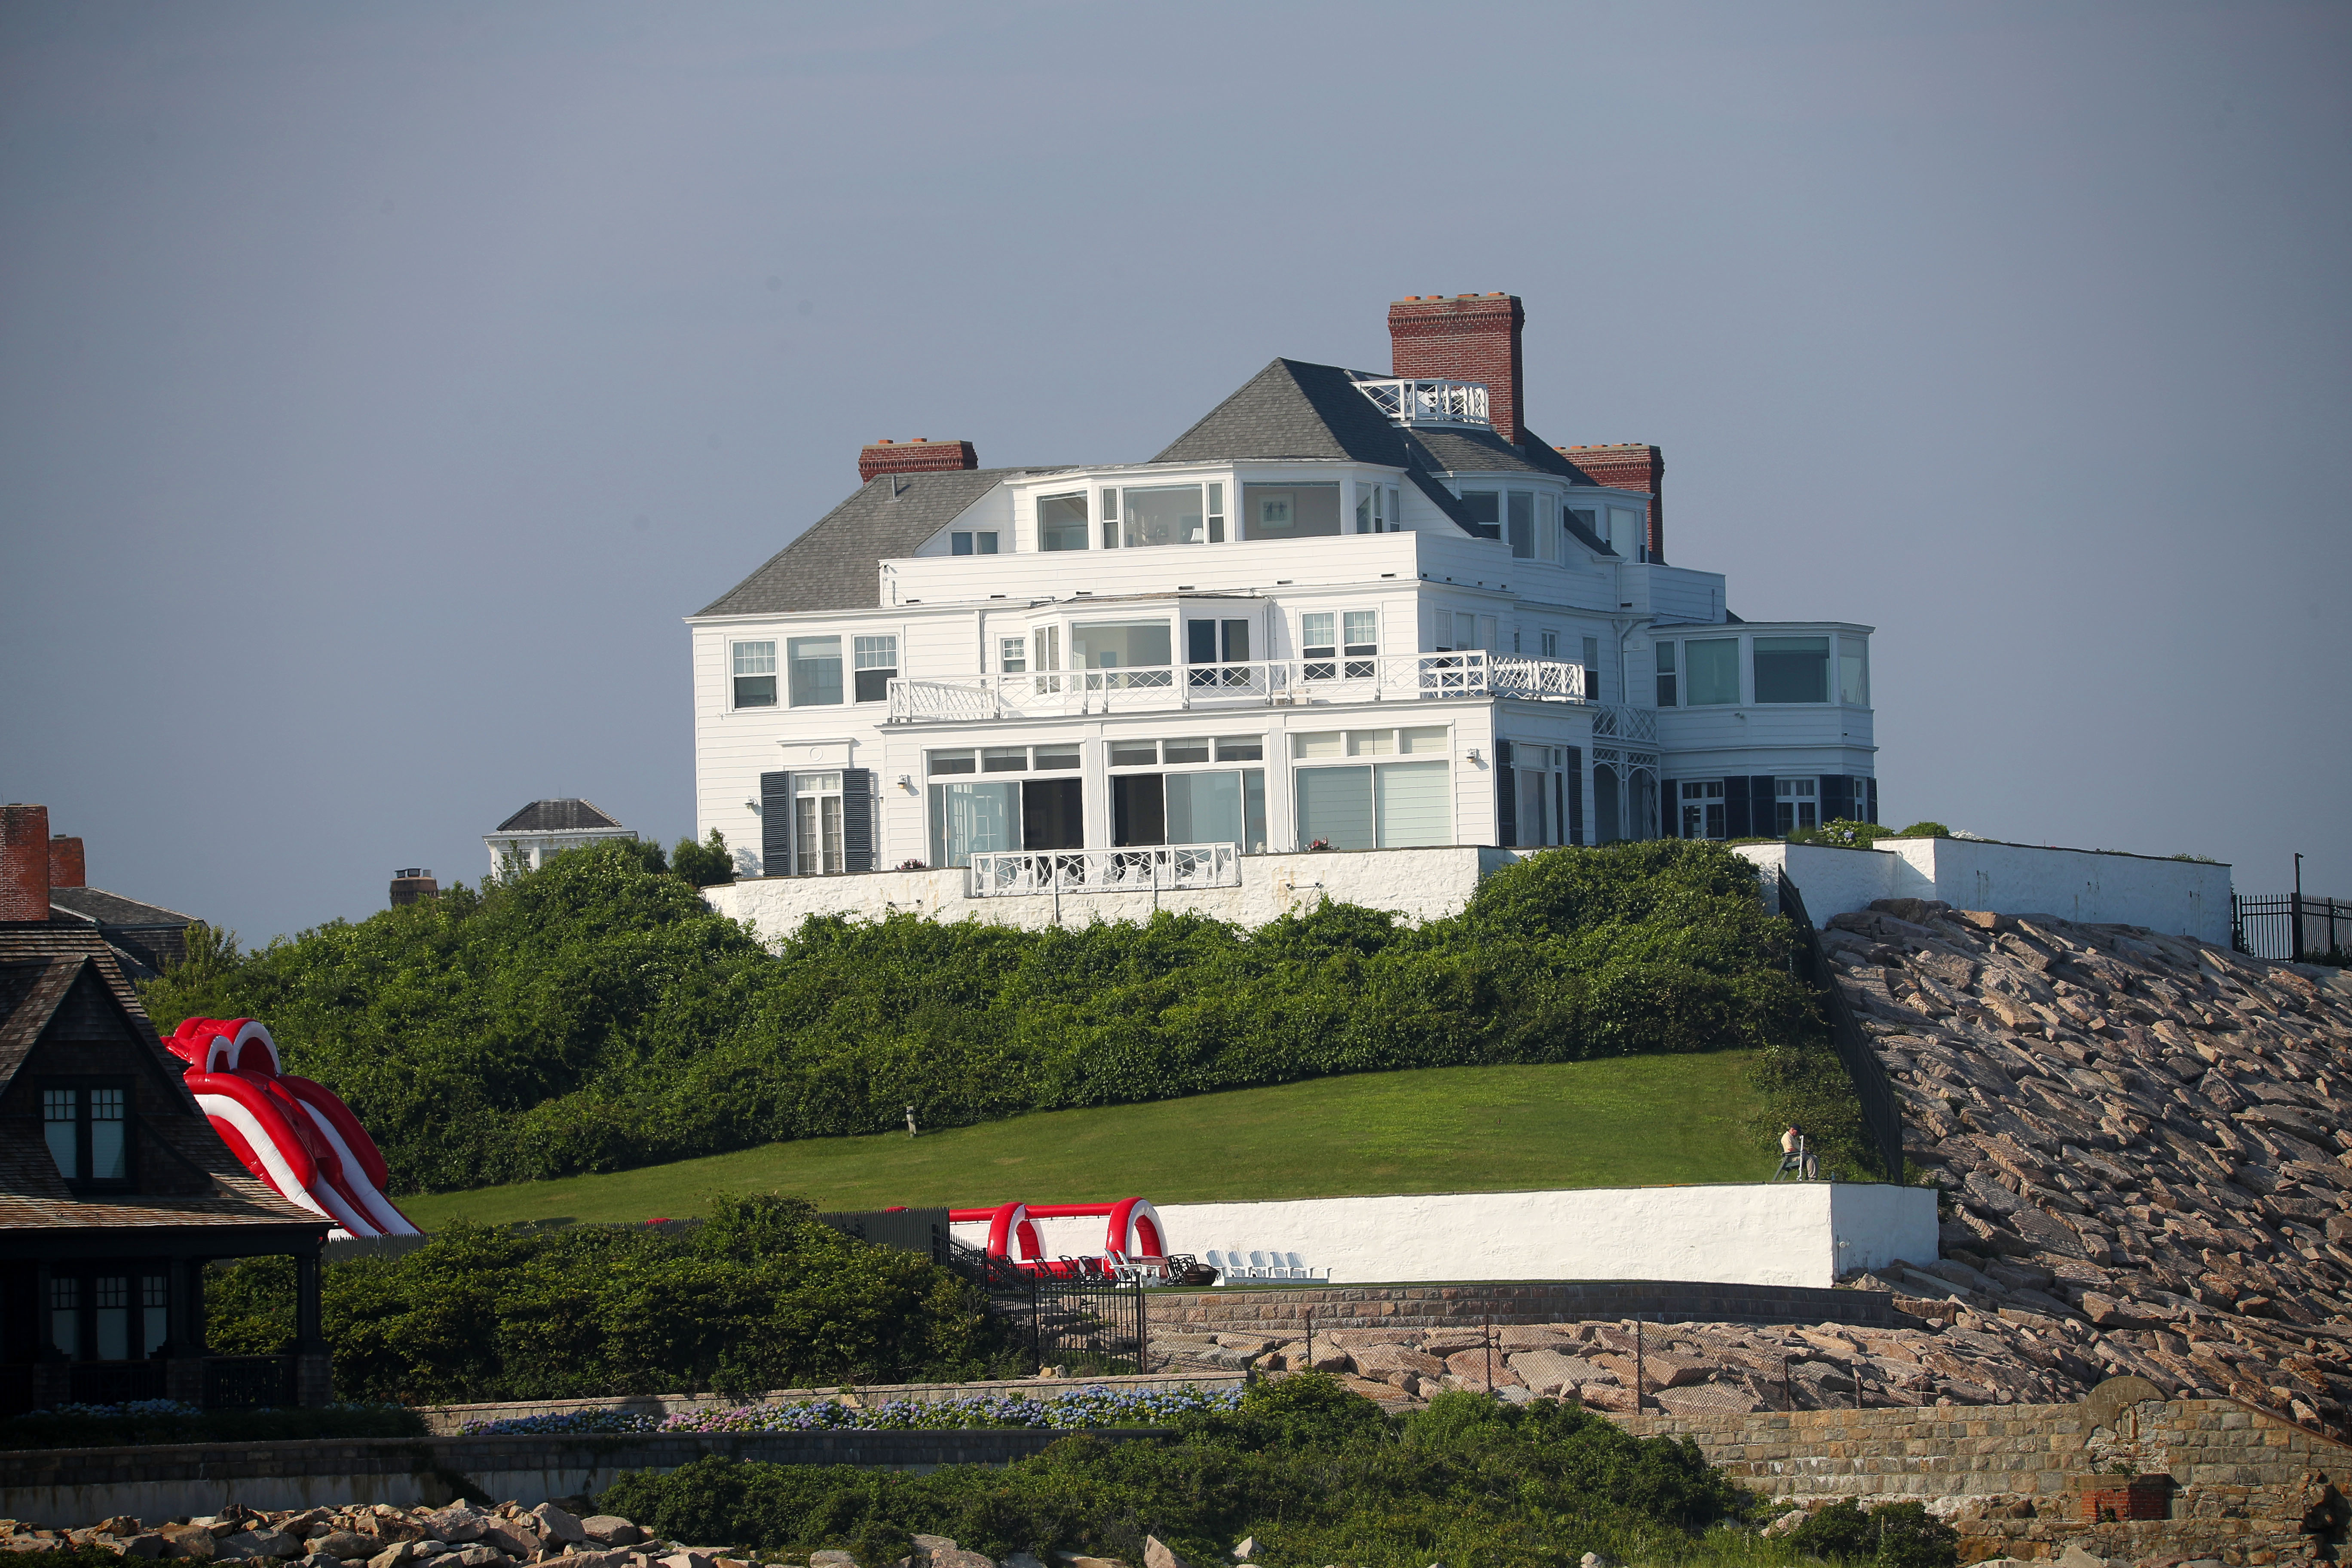 Taylor Swift's iconic $17M Rhode Island vacation home